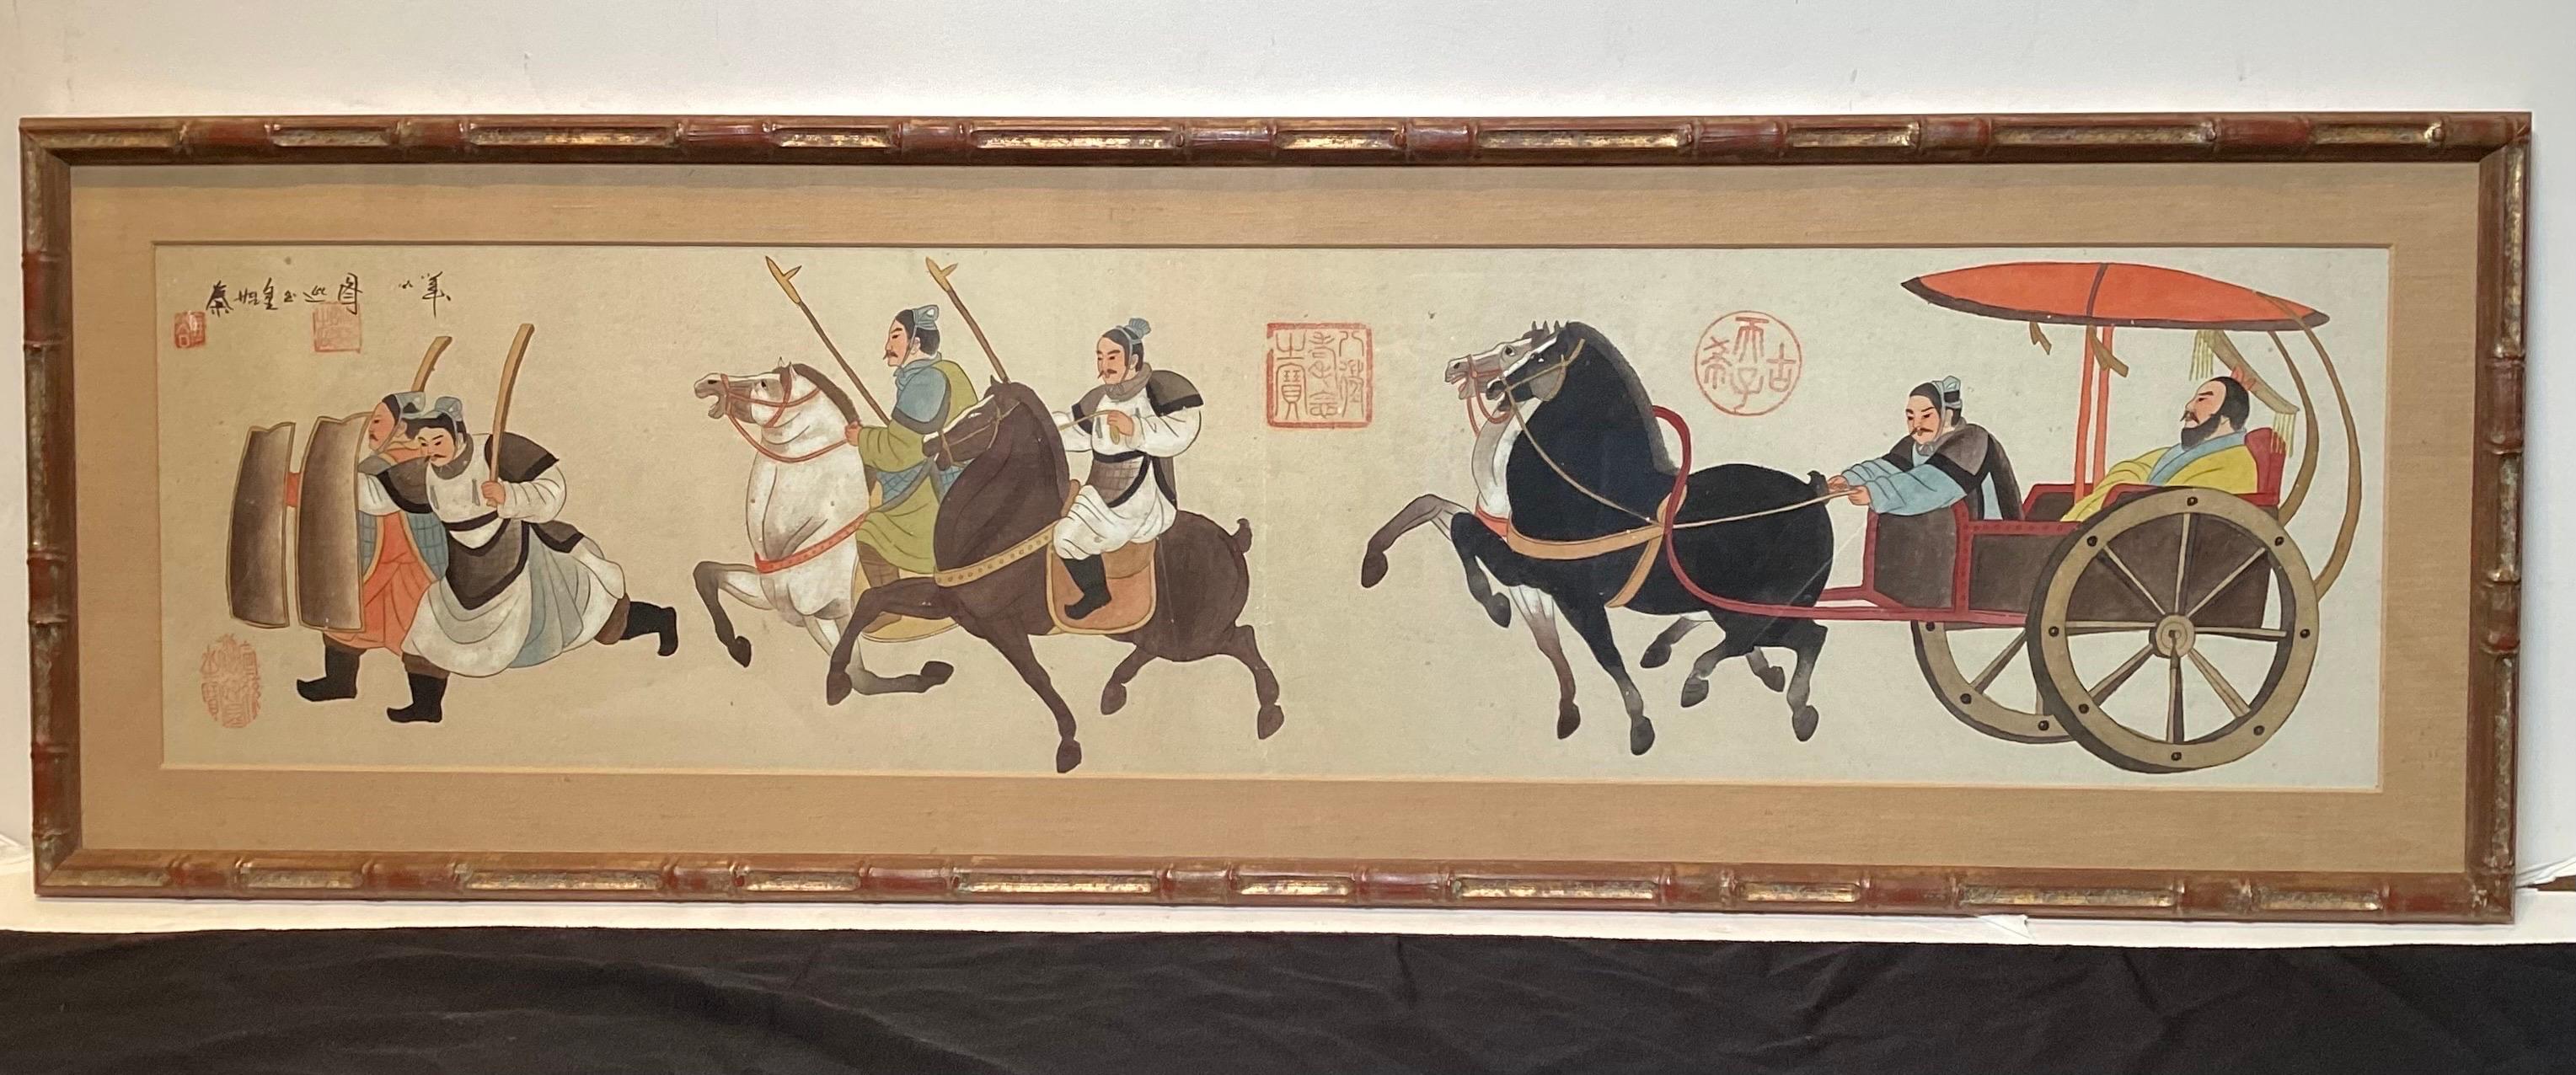 2 Magnificent water colors of emperor Qin Shi Huang of the Qin Dynasty surveying his kingdom. The watercolors were done in the 19th Century with later carved faux bamboo frames with an aged gilt finish. The paintings depicting Qin Shi Huang riding